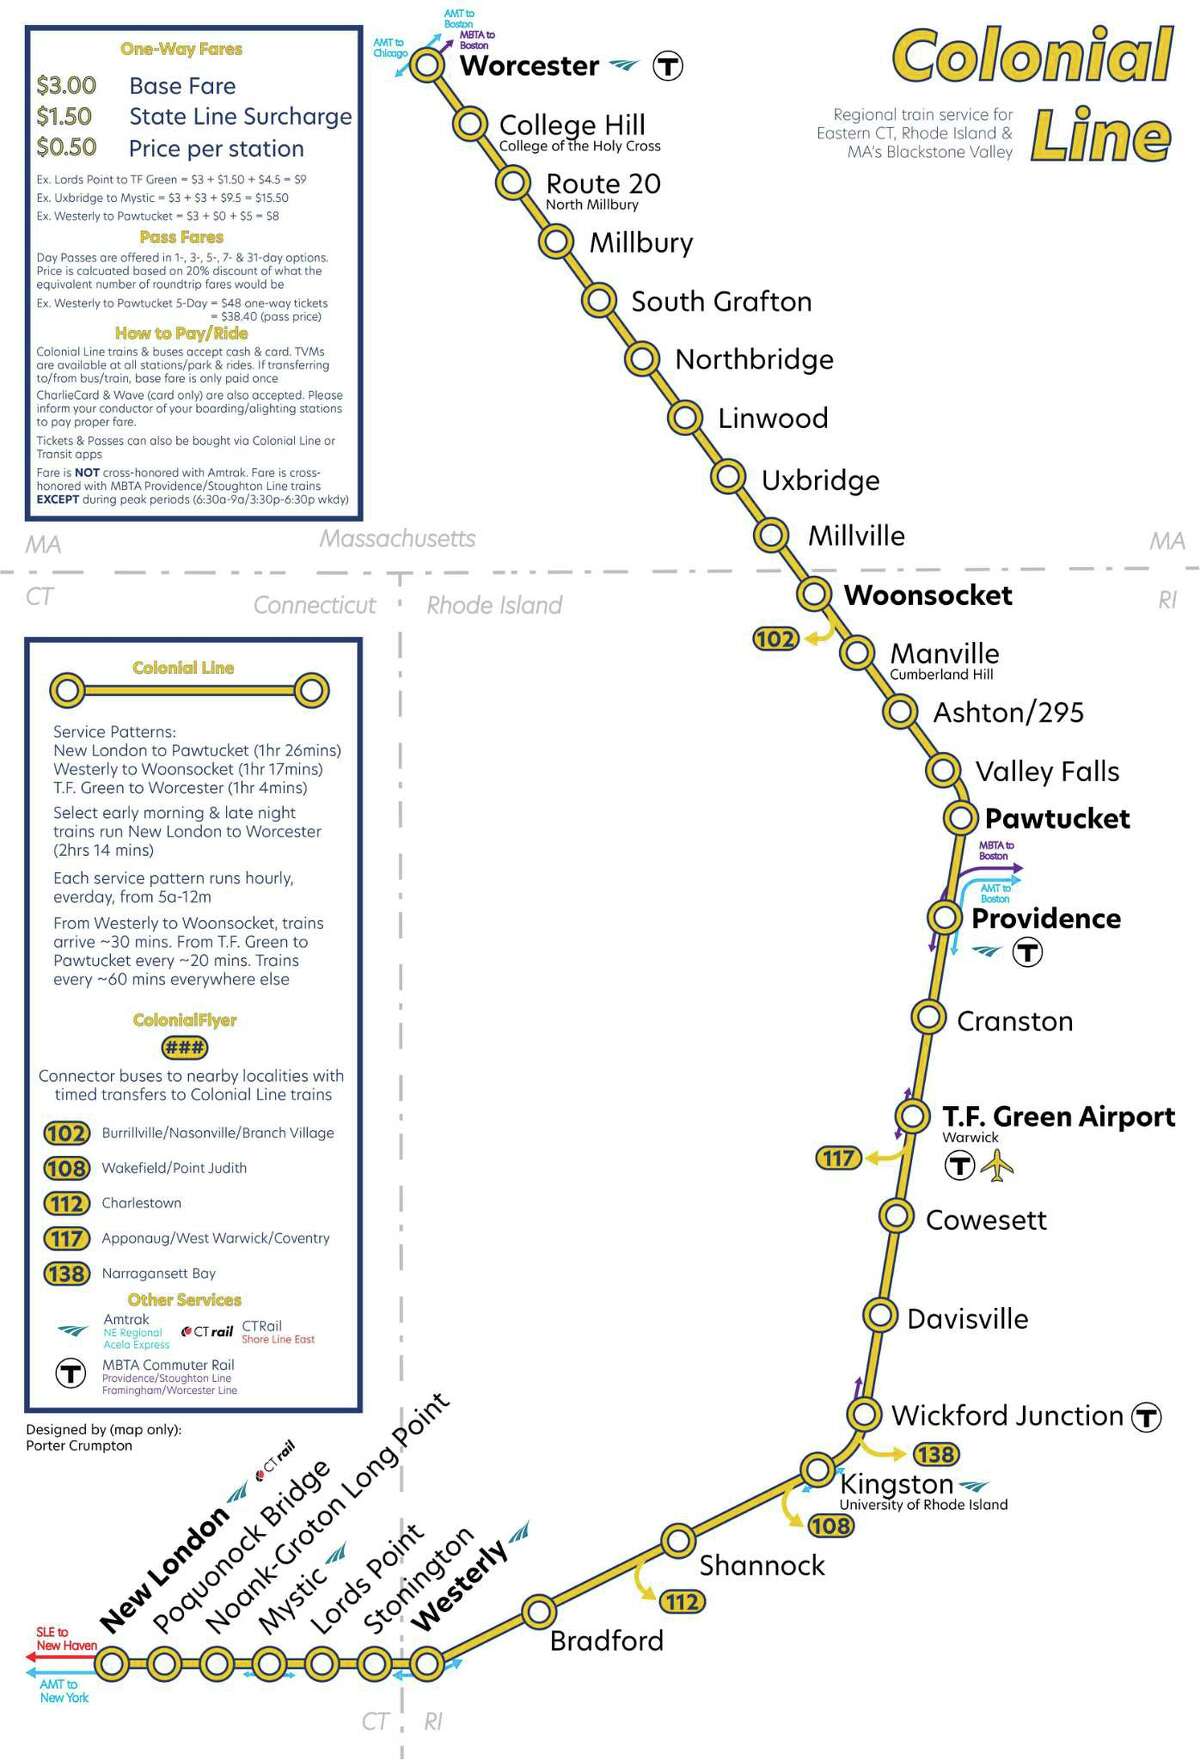 Porter Crumpton designed a fantasy local rail line from New London to Worcester, Mass., hitting many stops in between.